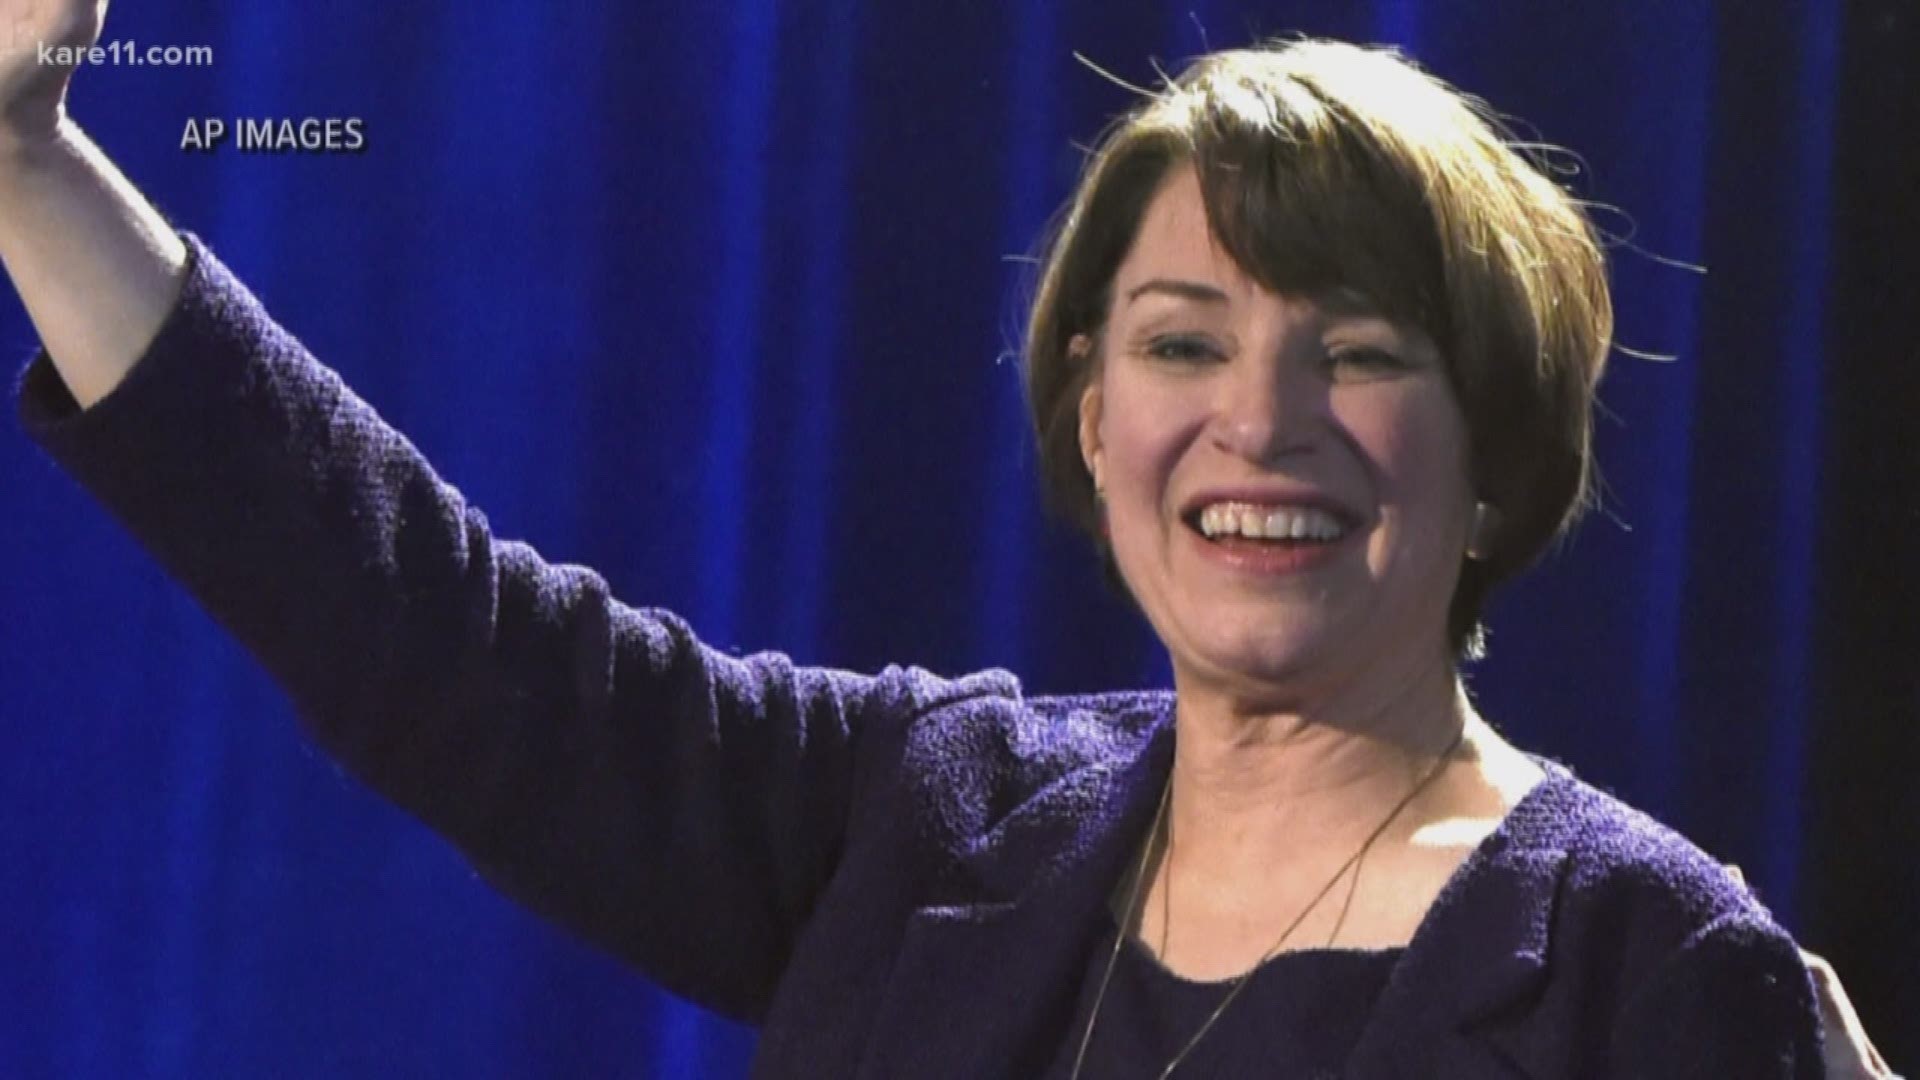 Senator Amy Klobuchar invited media outlets to join her at Boom Island Park in Minneapolis on Sunday for an announcement.